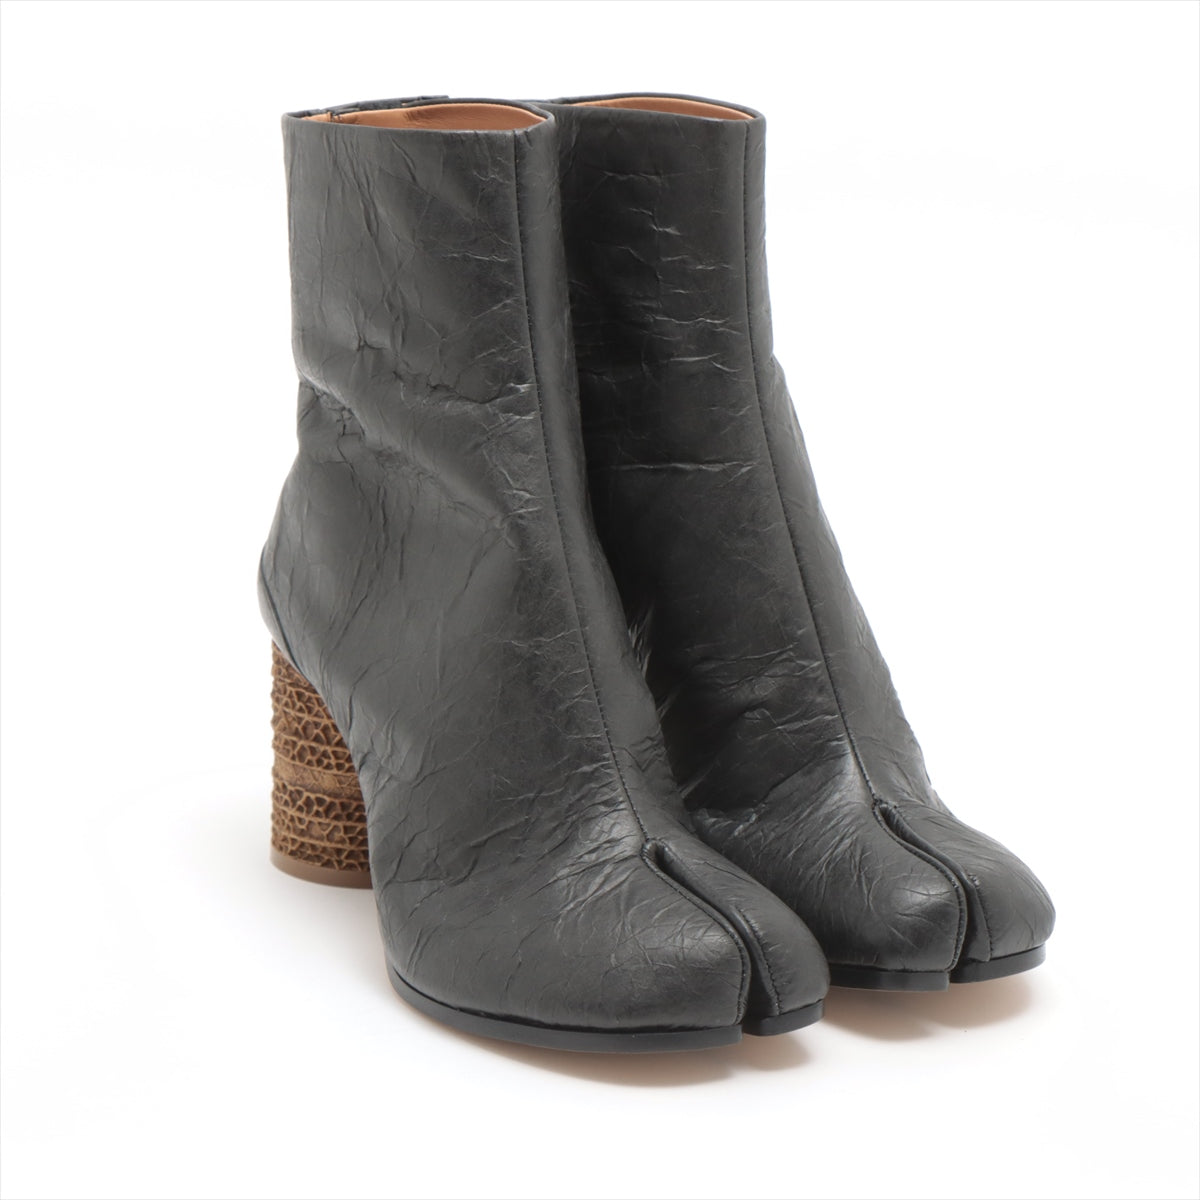 Maison Margiela TABI Leather Short Boots 36 1/2 Ladies' Black S58WU0381 Wrinkle processing 22 box There is a bag